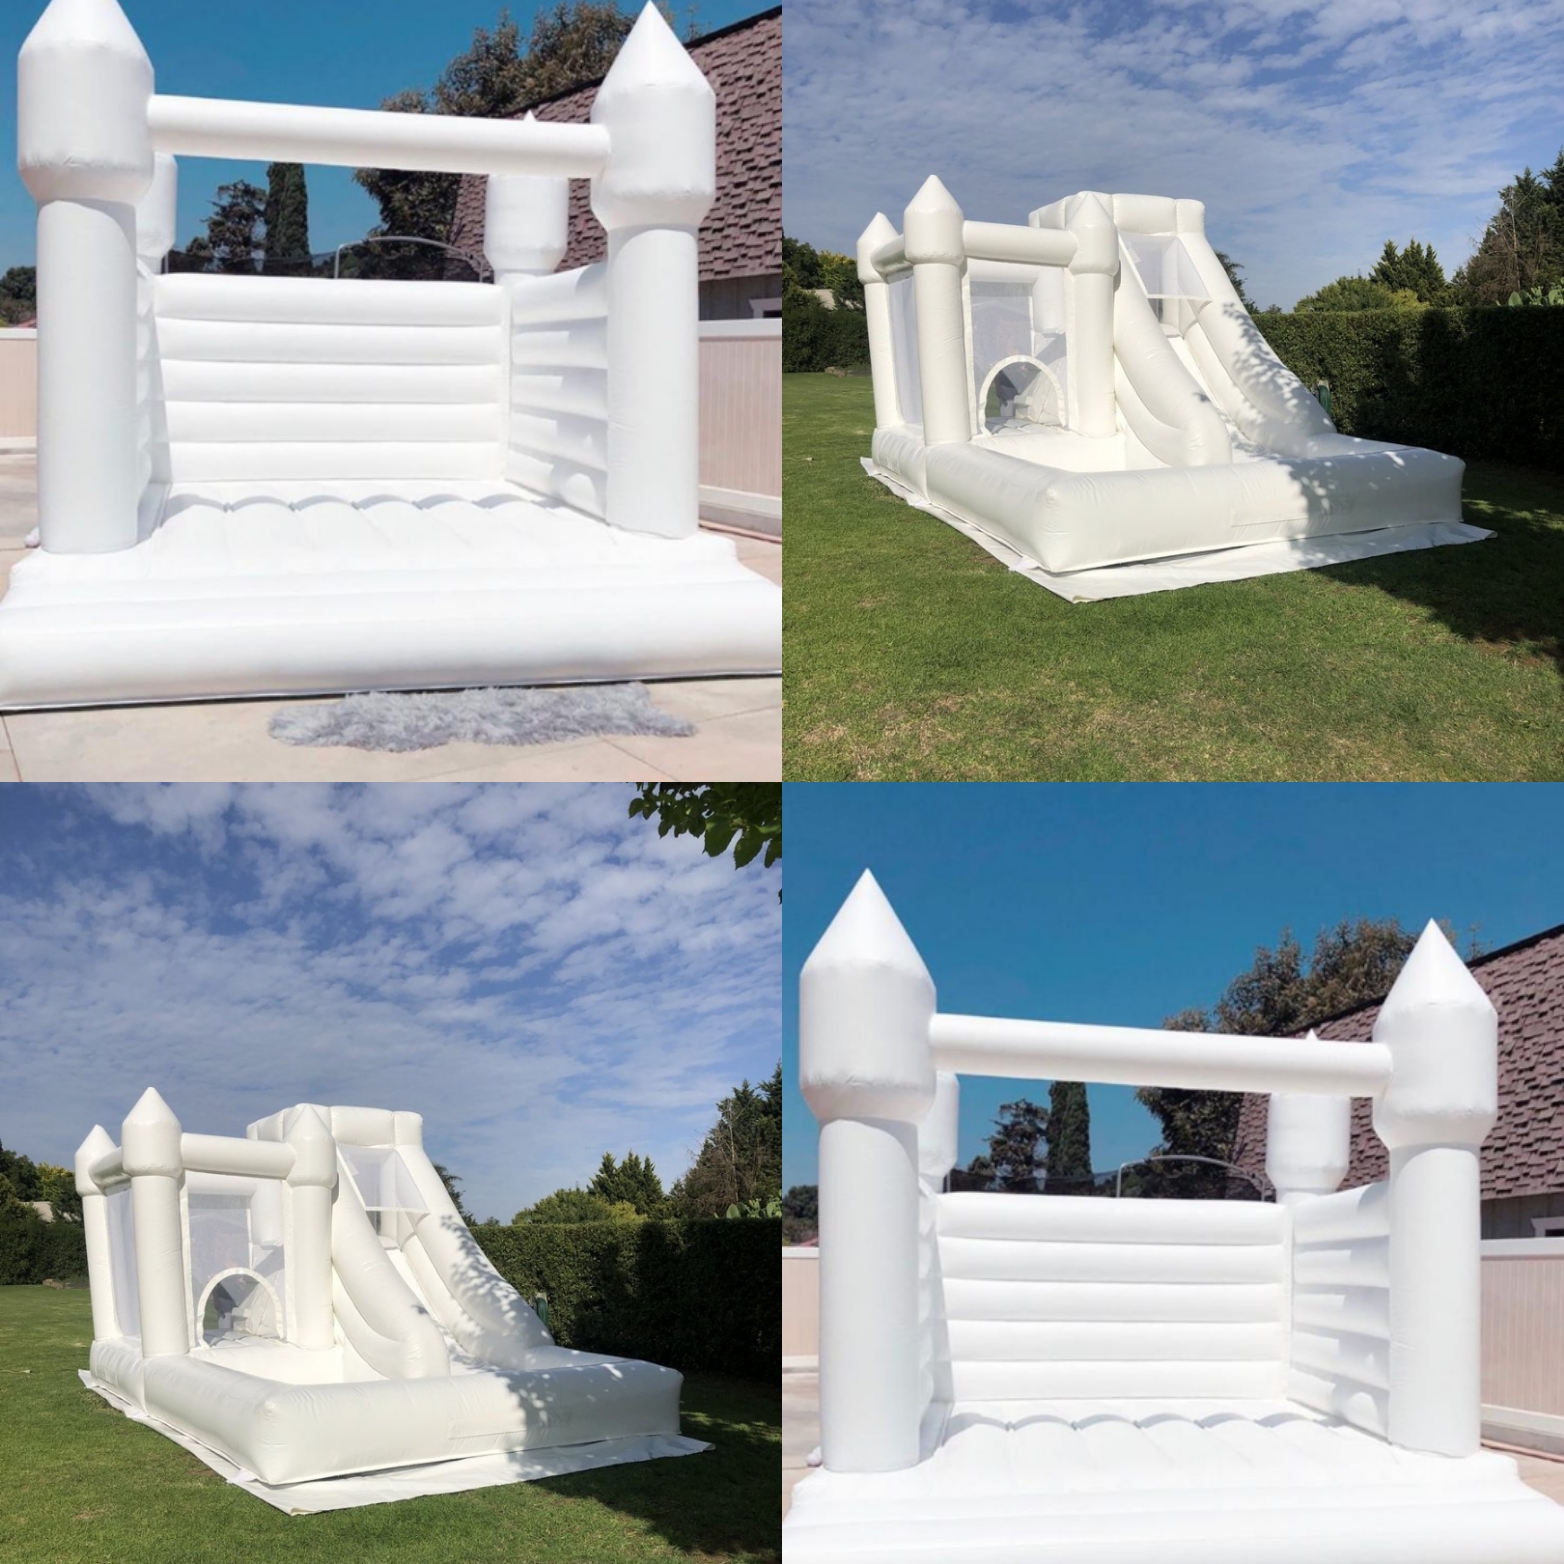 How to clean the inflatable castles?